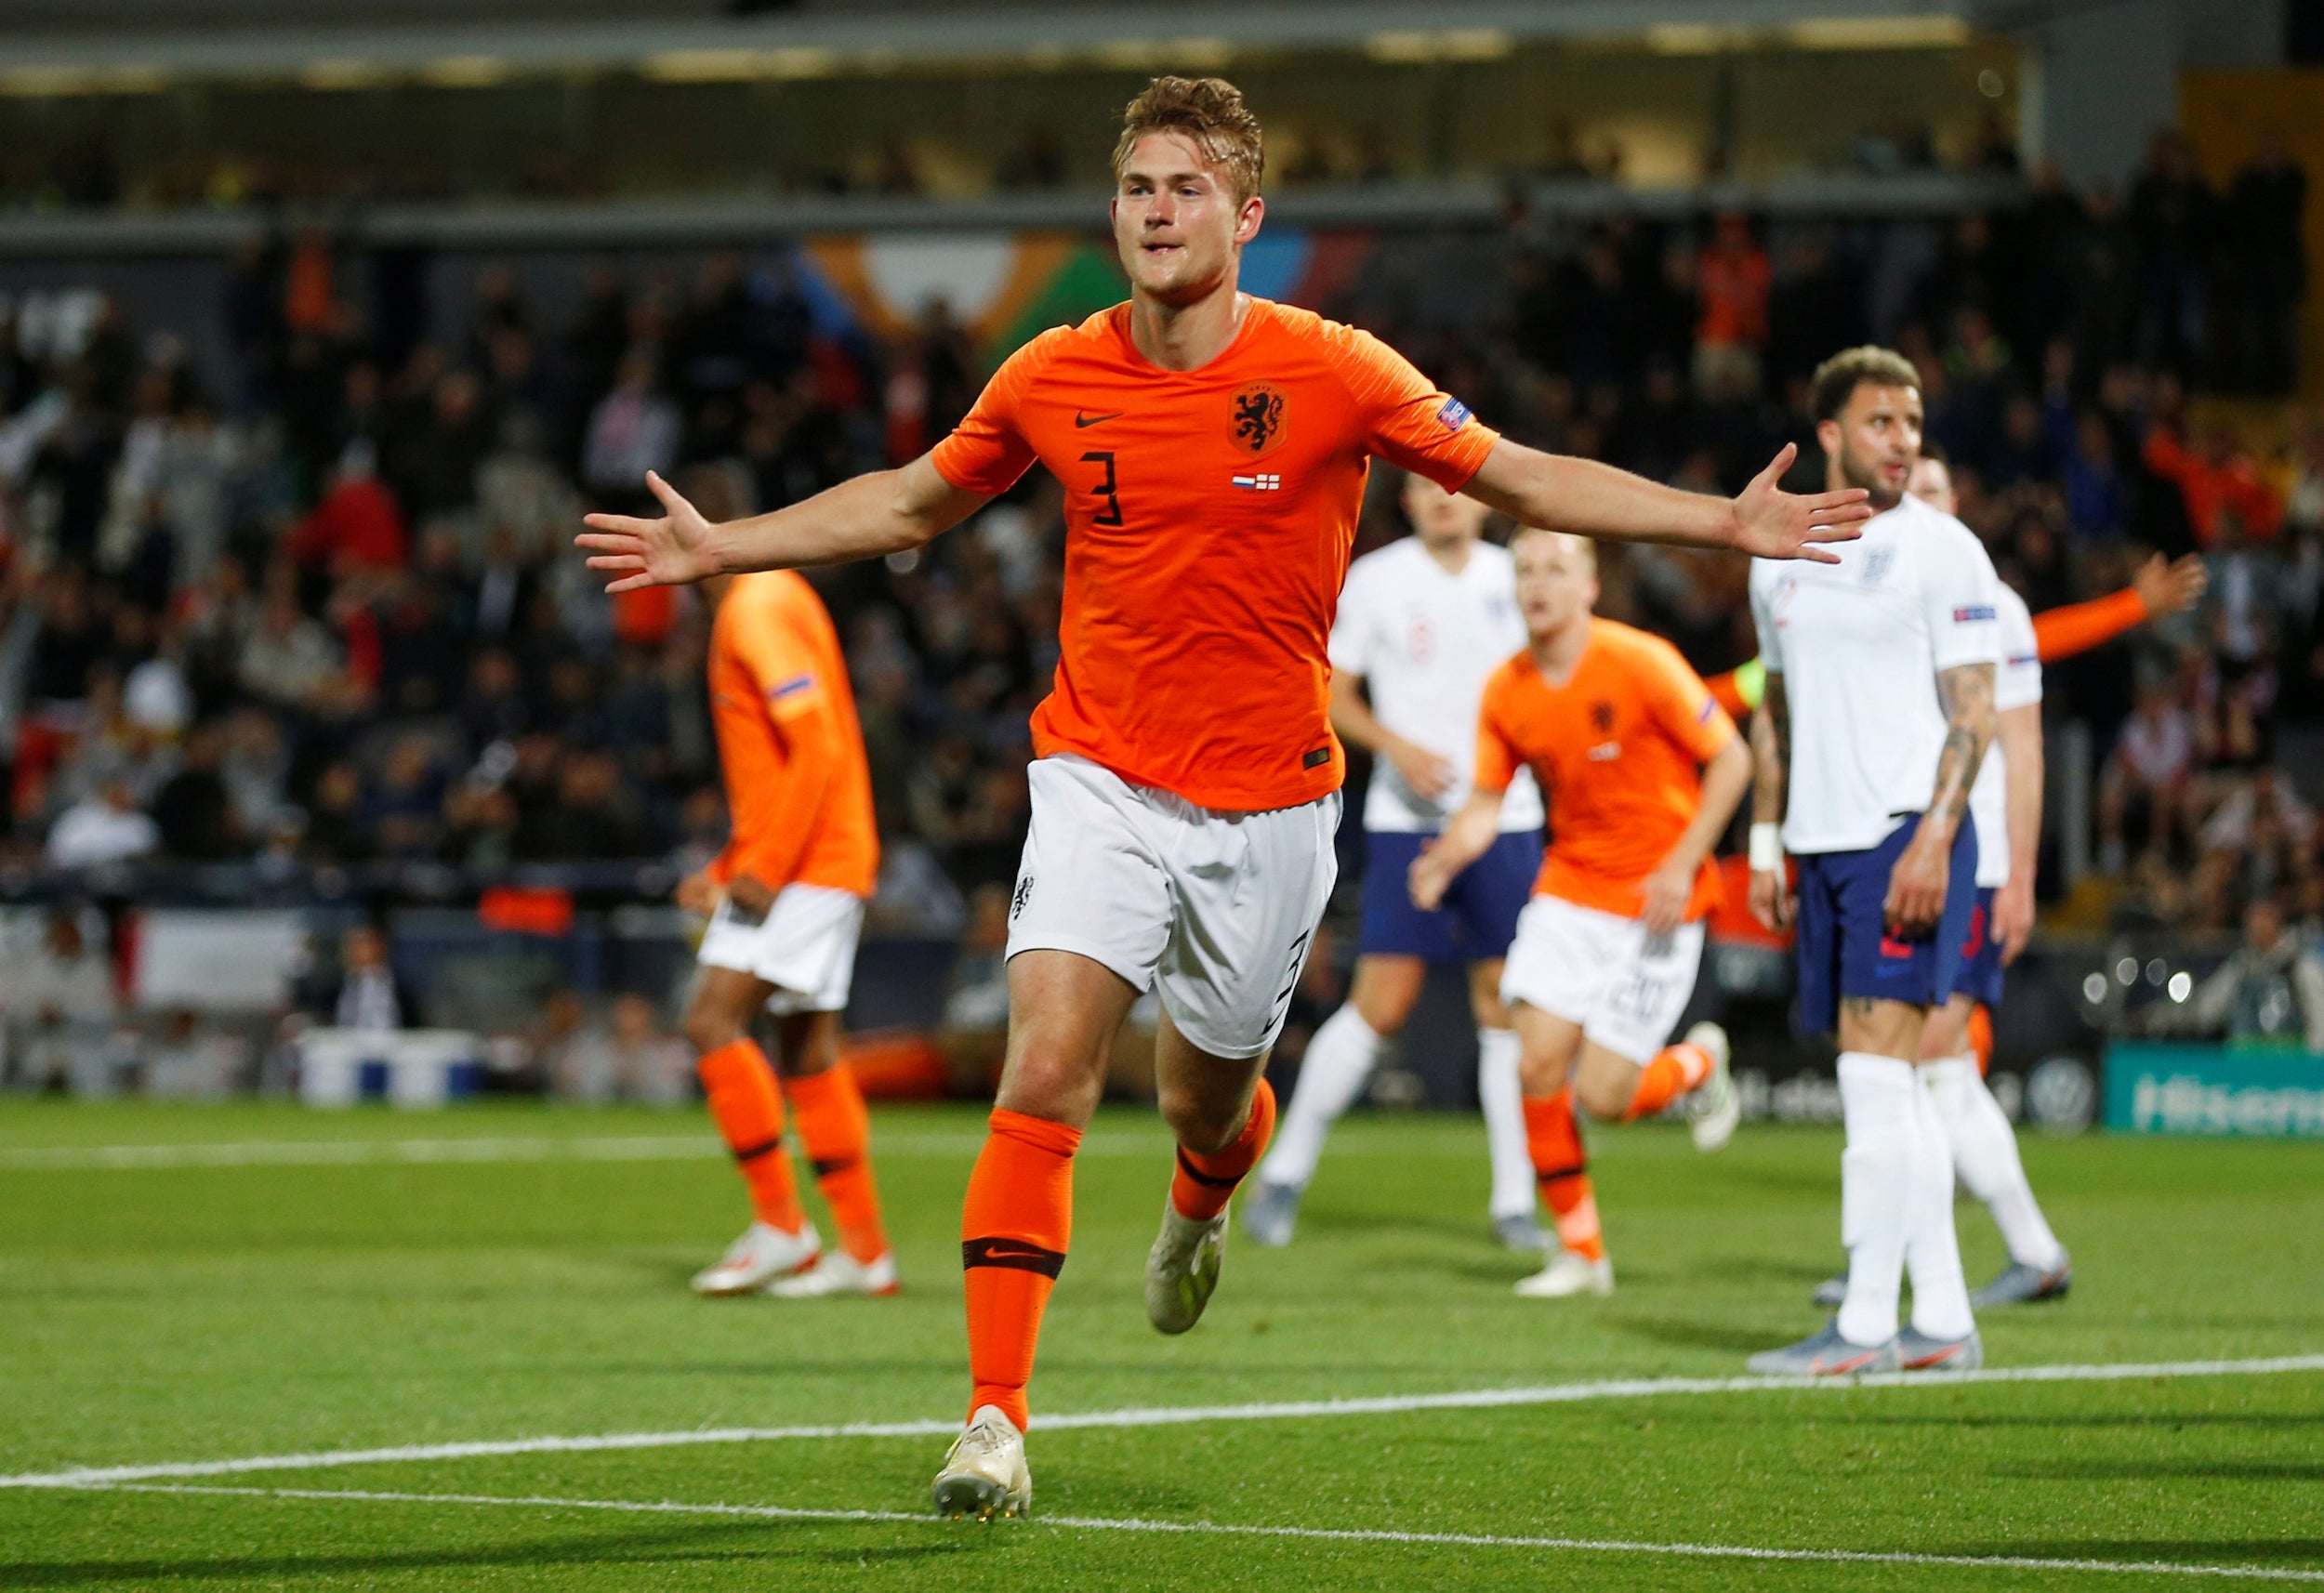 De Ligt's future will be one of the key subjects of the summer